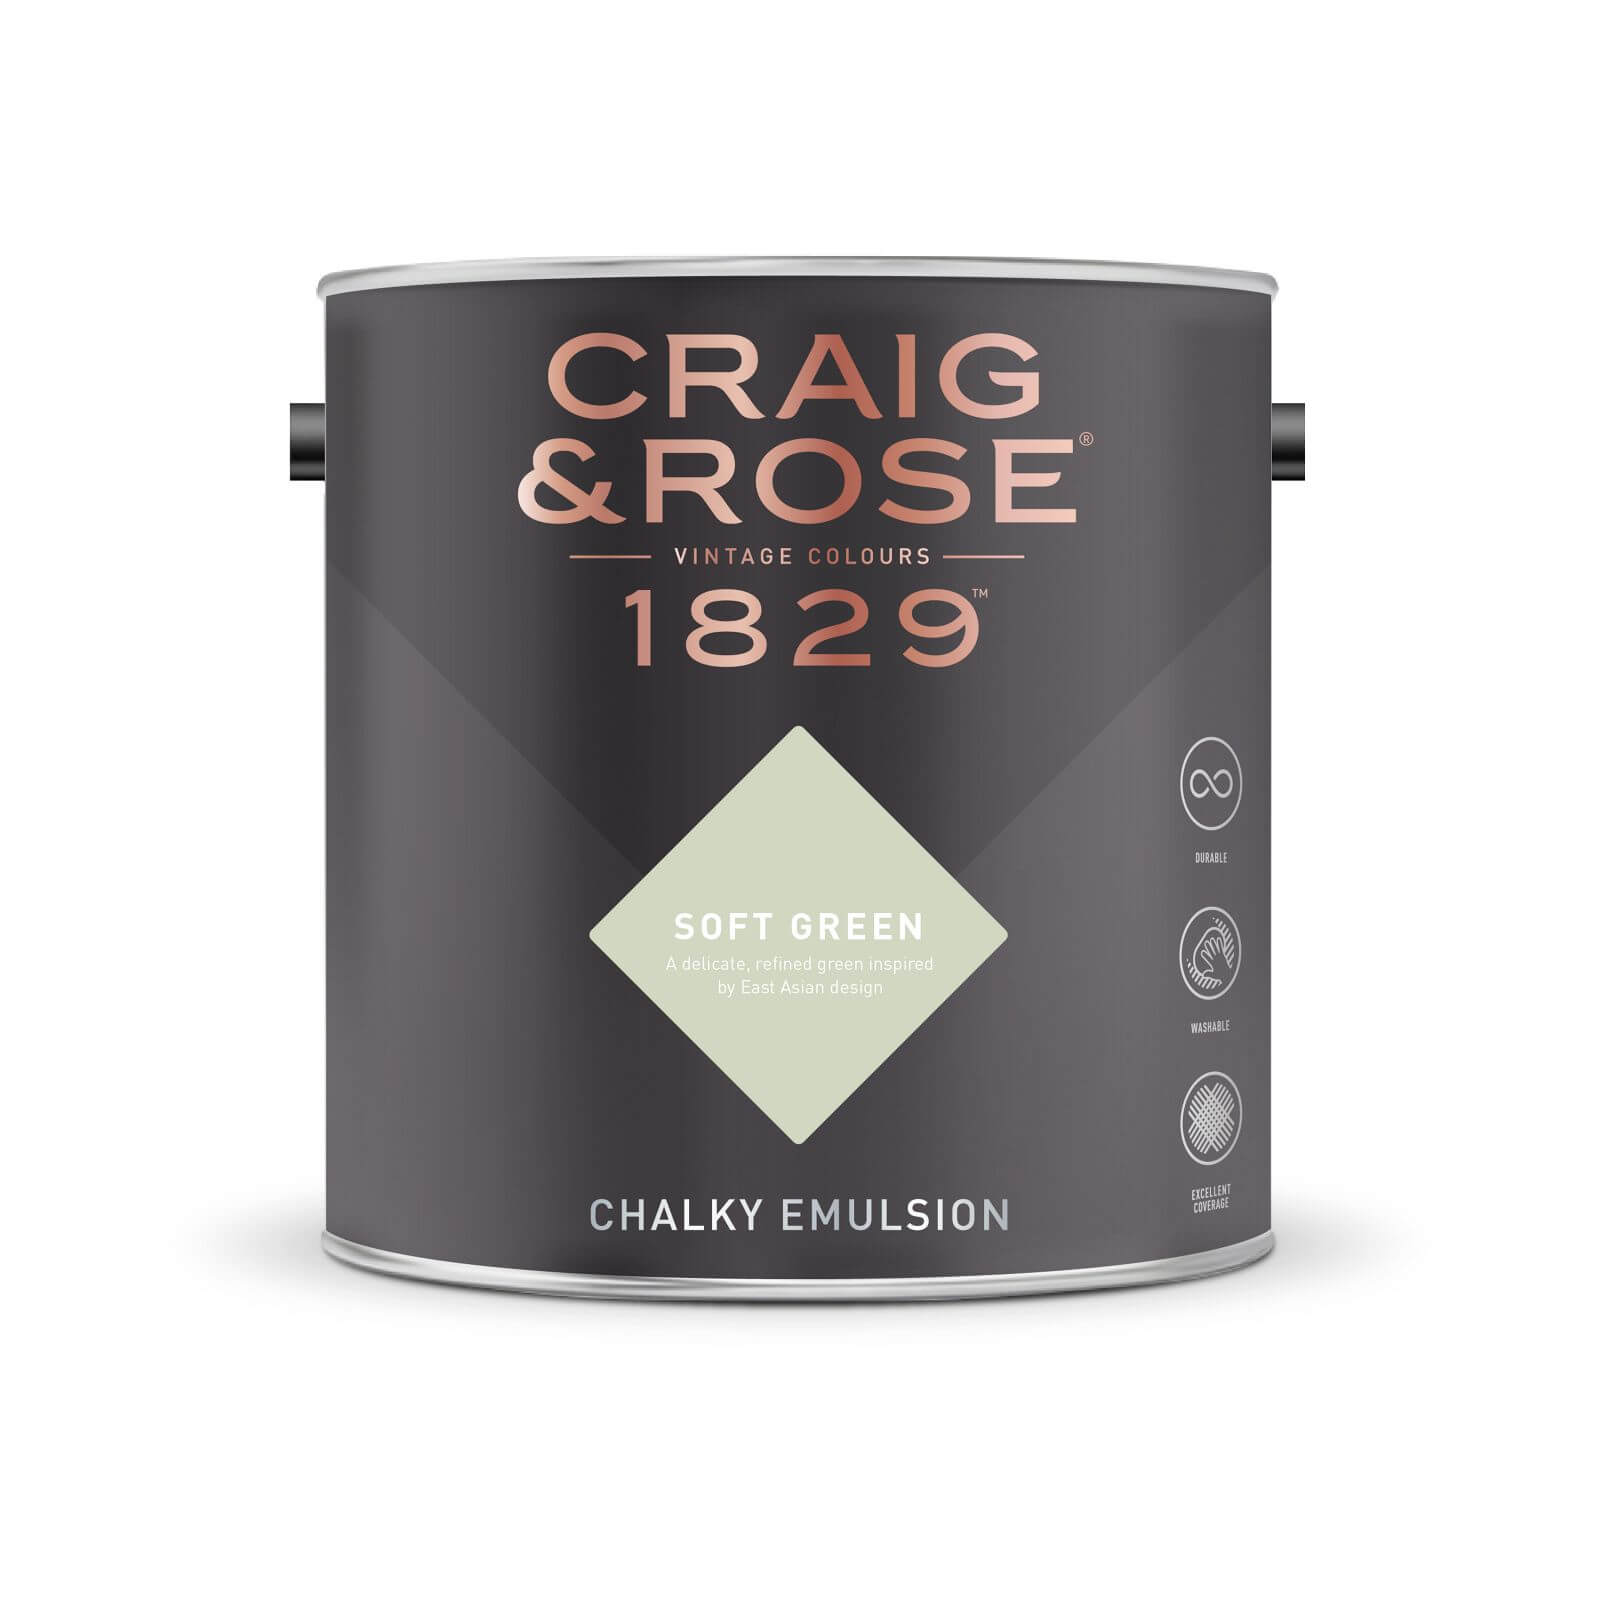 Craig & Rose 1829 Chalky Emulsion Paint Soft Green - Tester 50ml